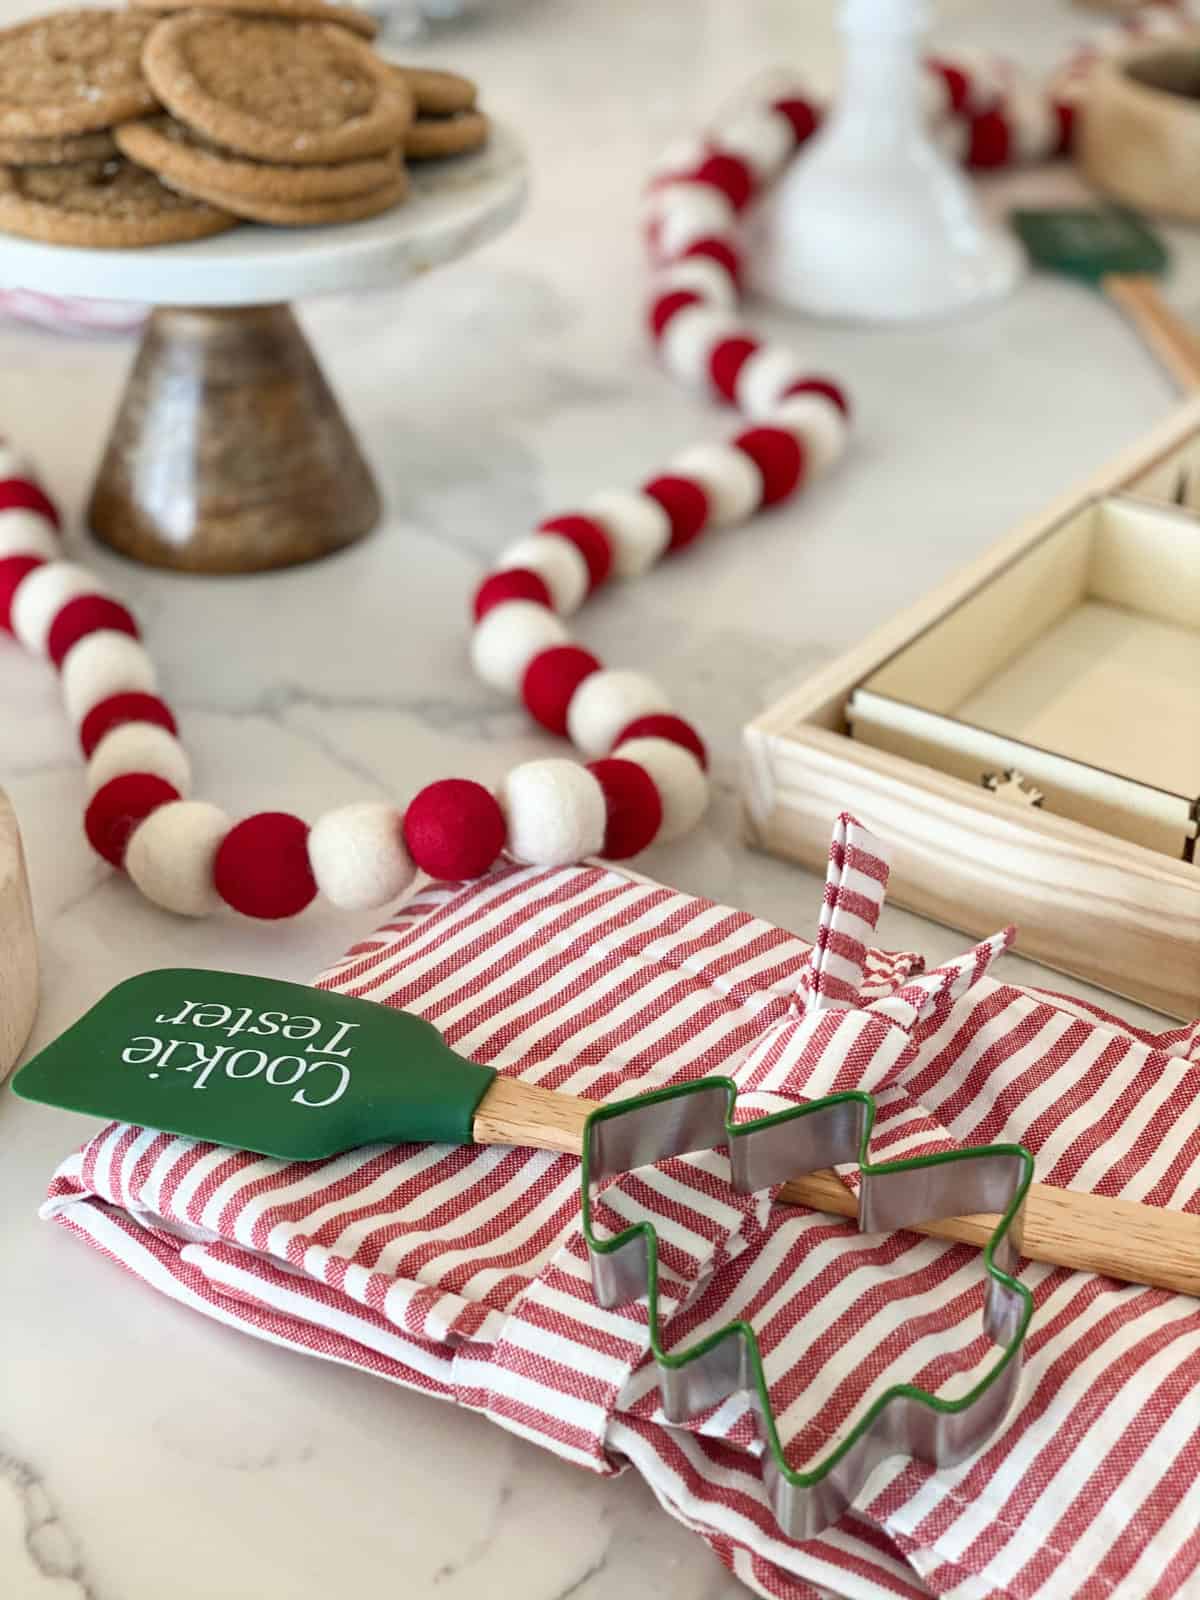 A spatula and holiday apron with cookie cutter